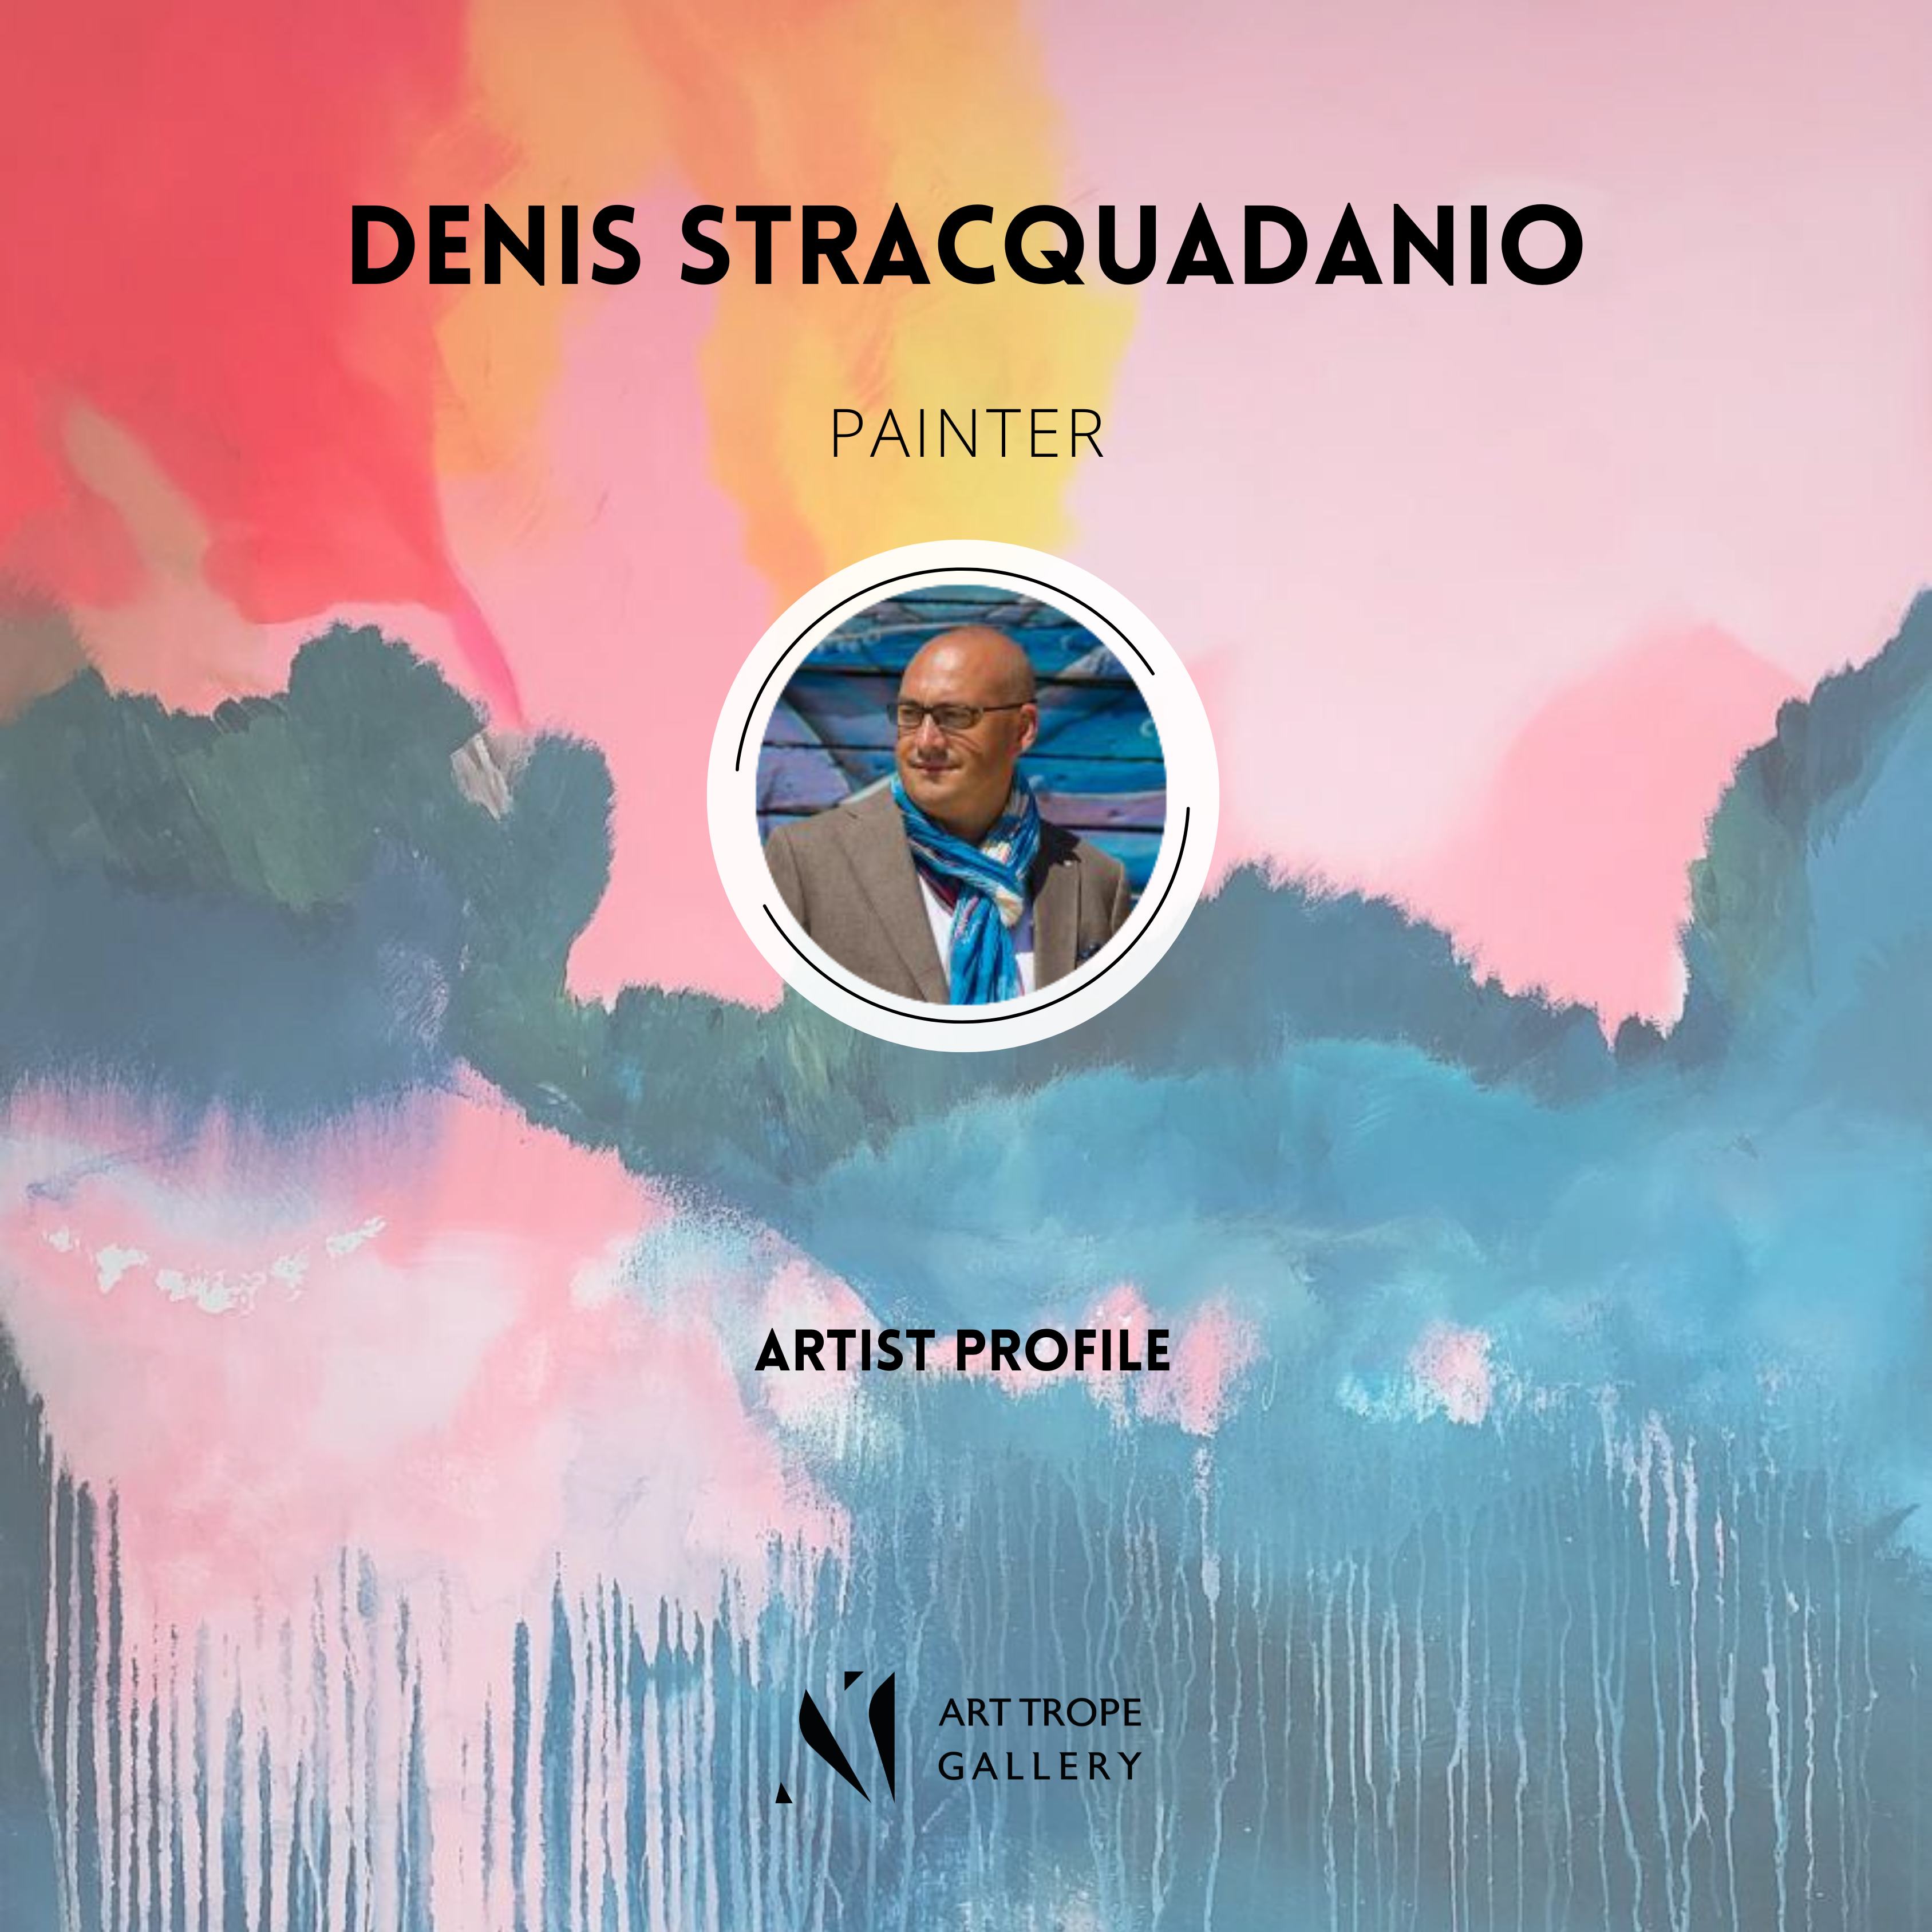 Art Trope Gallery features Painter Denis Stracquadanio in a dedicated article!